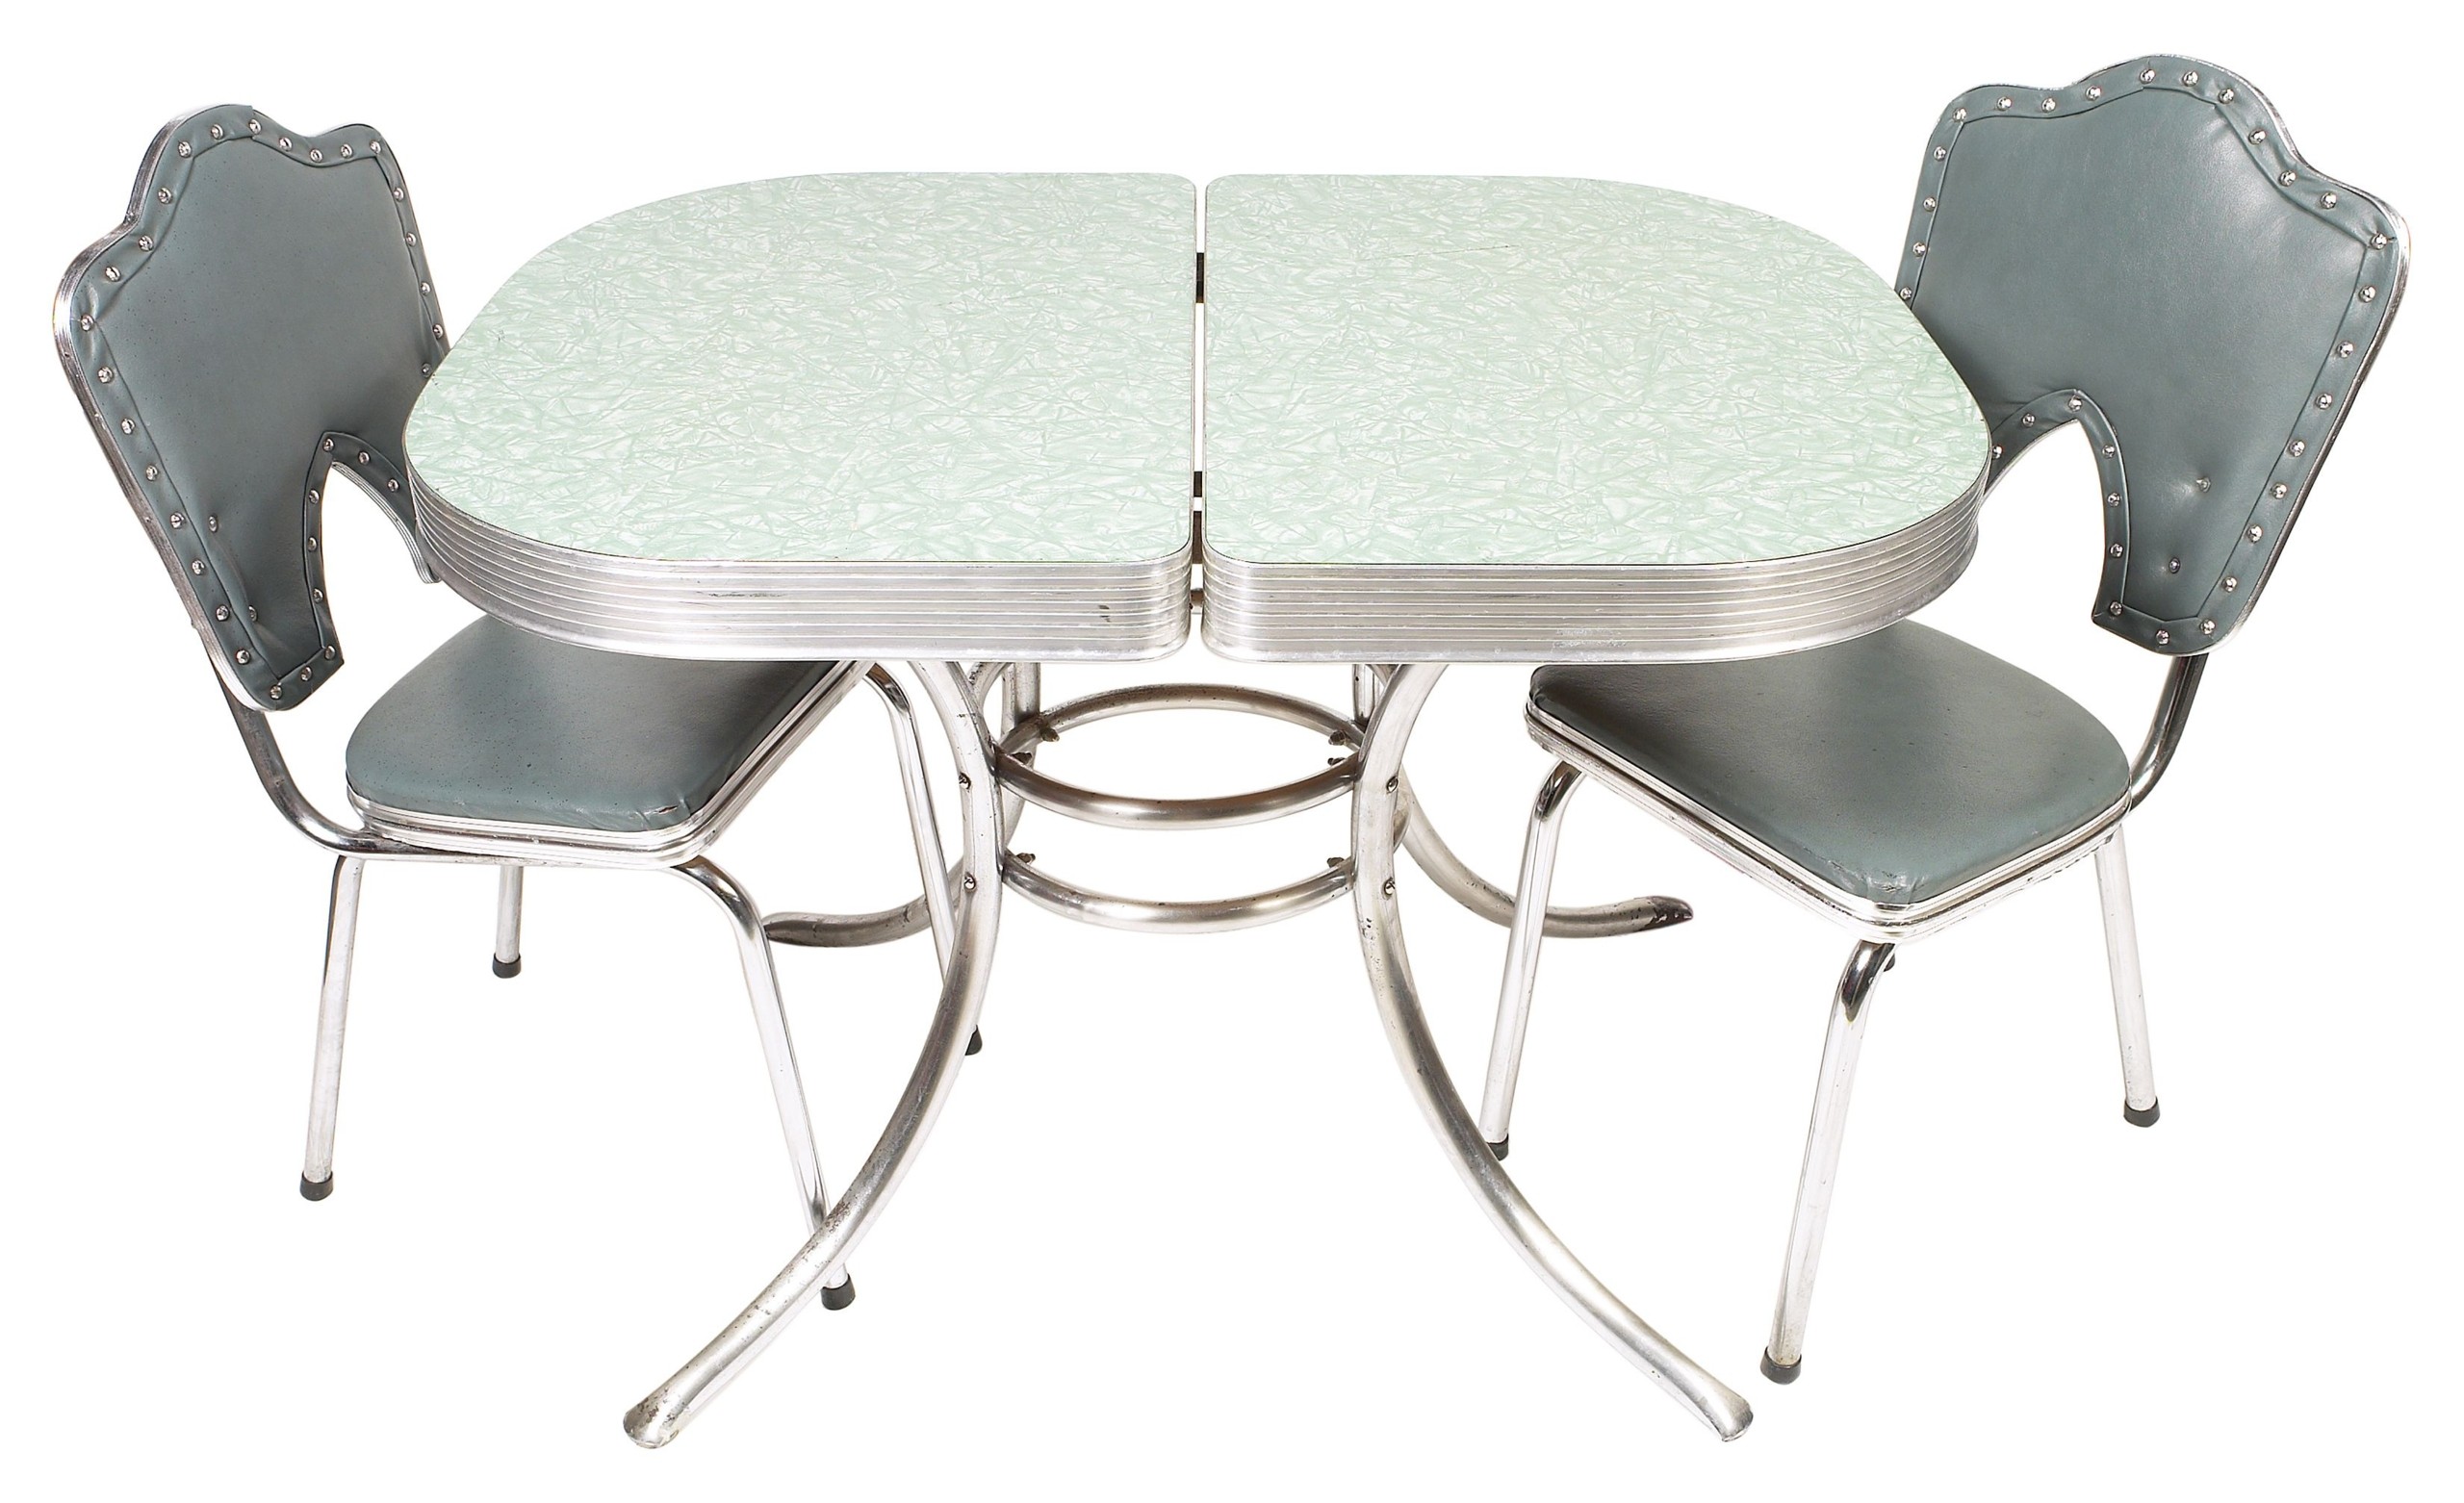 Formica table and chairs for sale